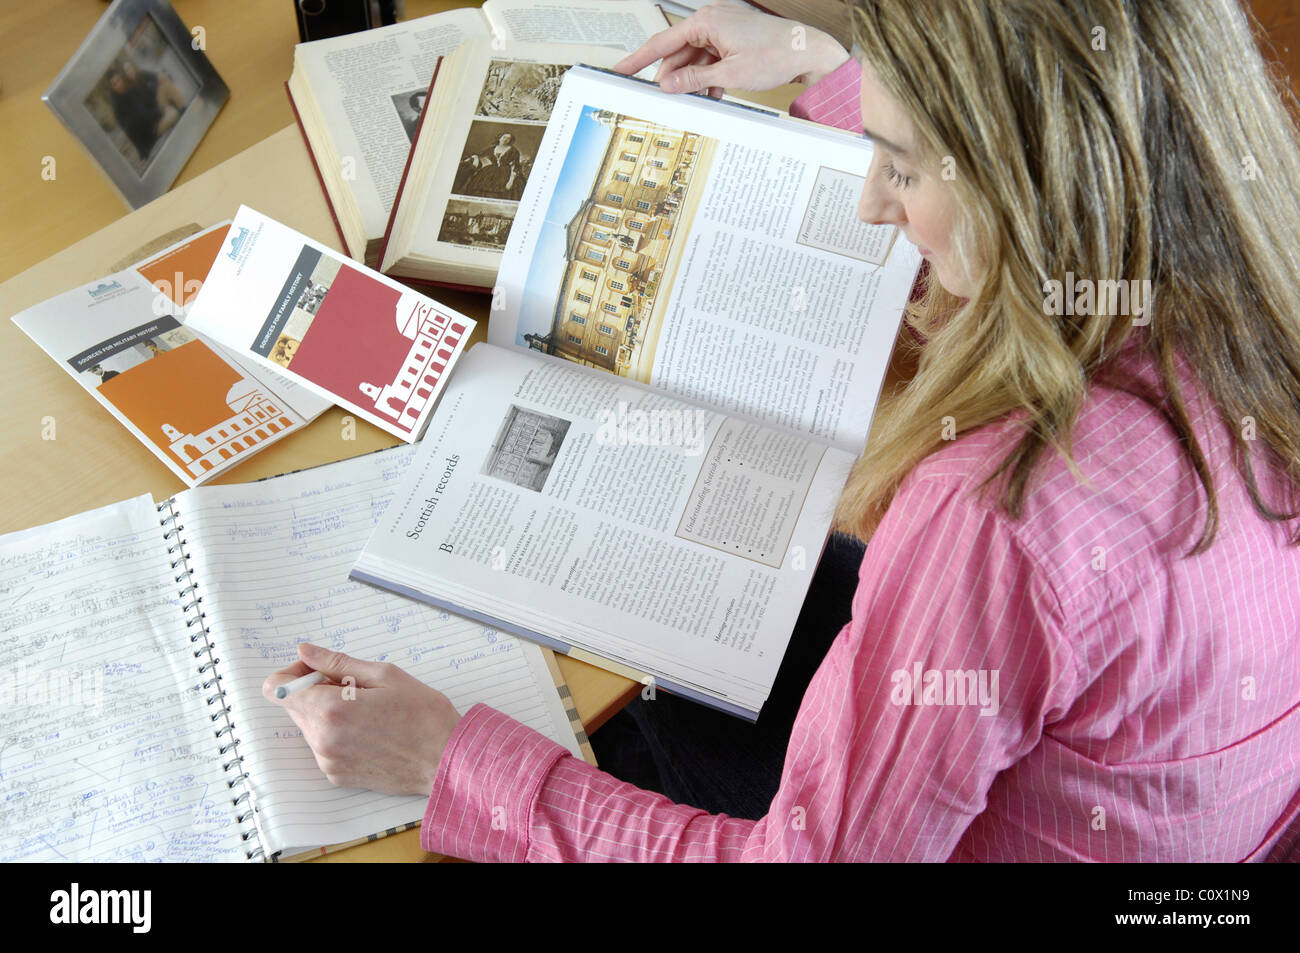 young women researching family history online with books and computer Stock Photo